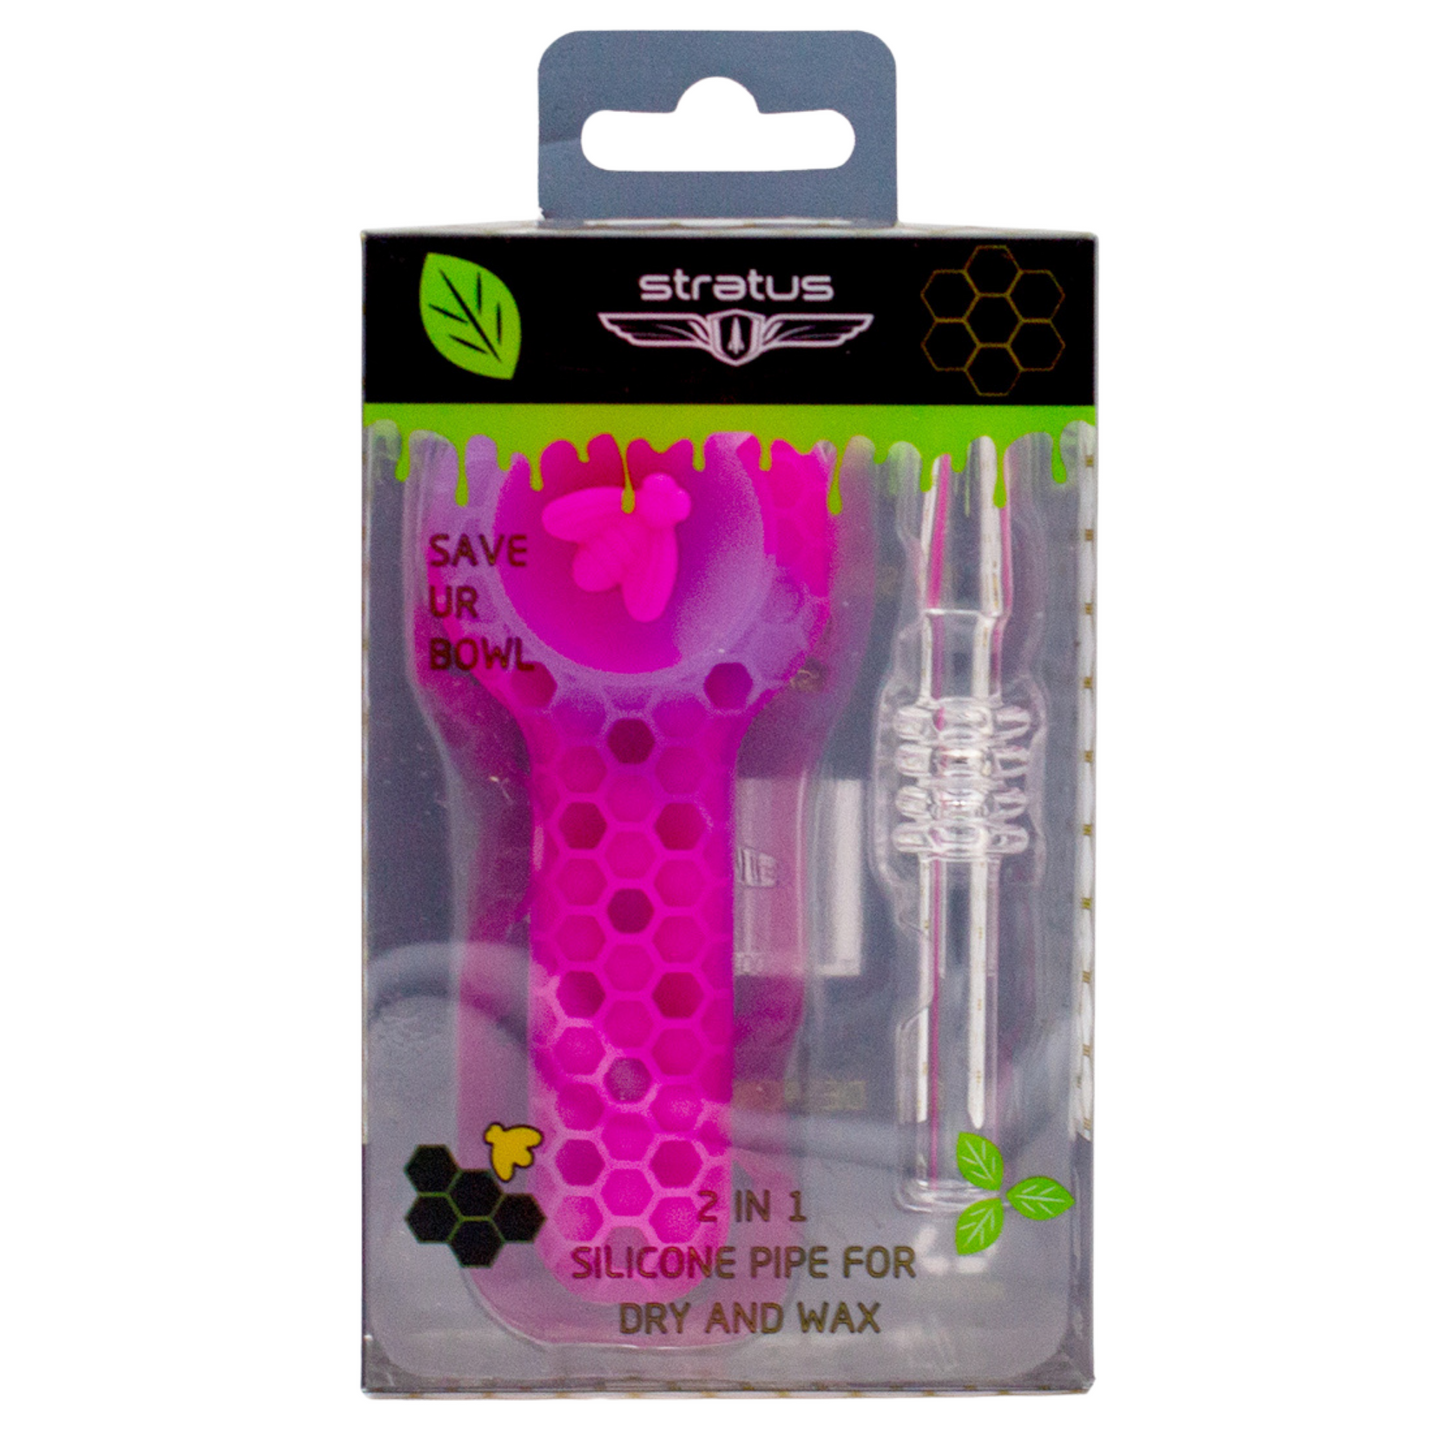 Stratus Silicone Bee 2 in 1 Wax & Dry